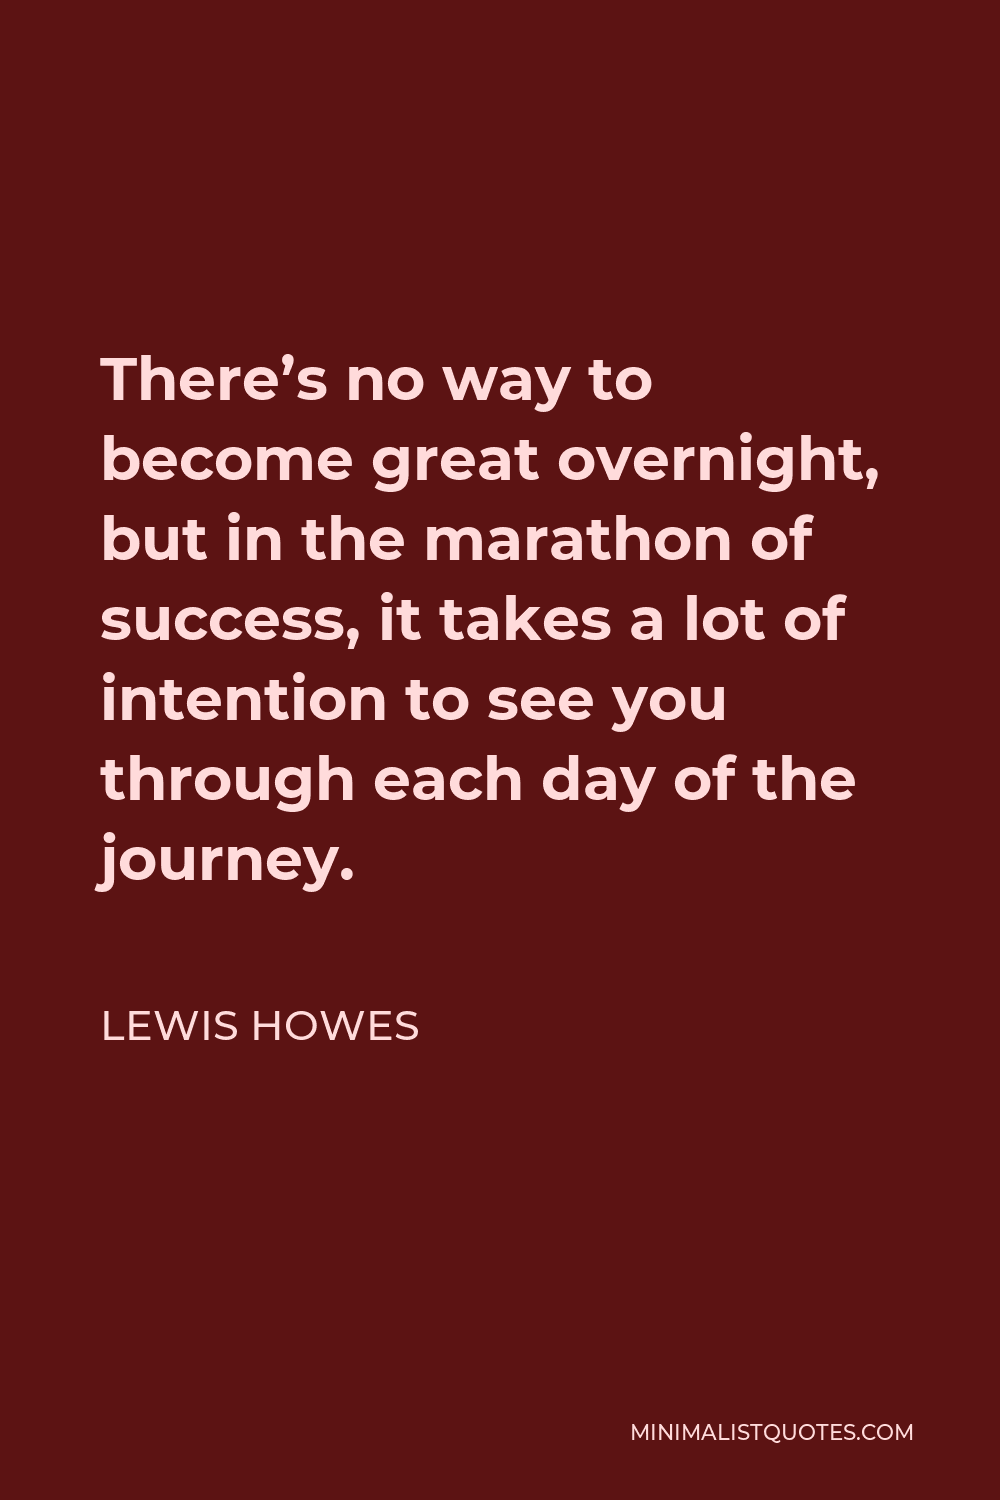 Lewis Howes Quote - There’s no way to become great overnight, but in the marathon of success, it takes a lot of intention to see you through each day of the journey.